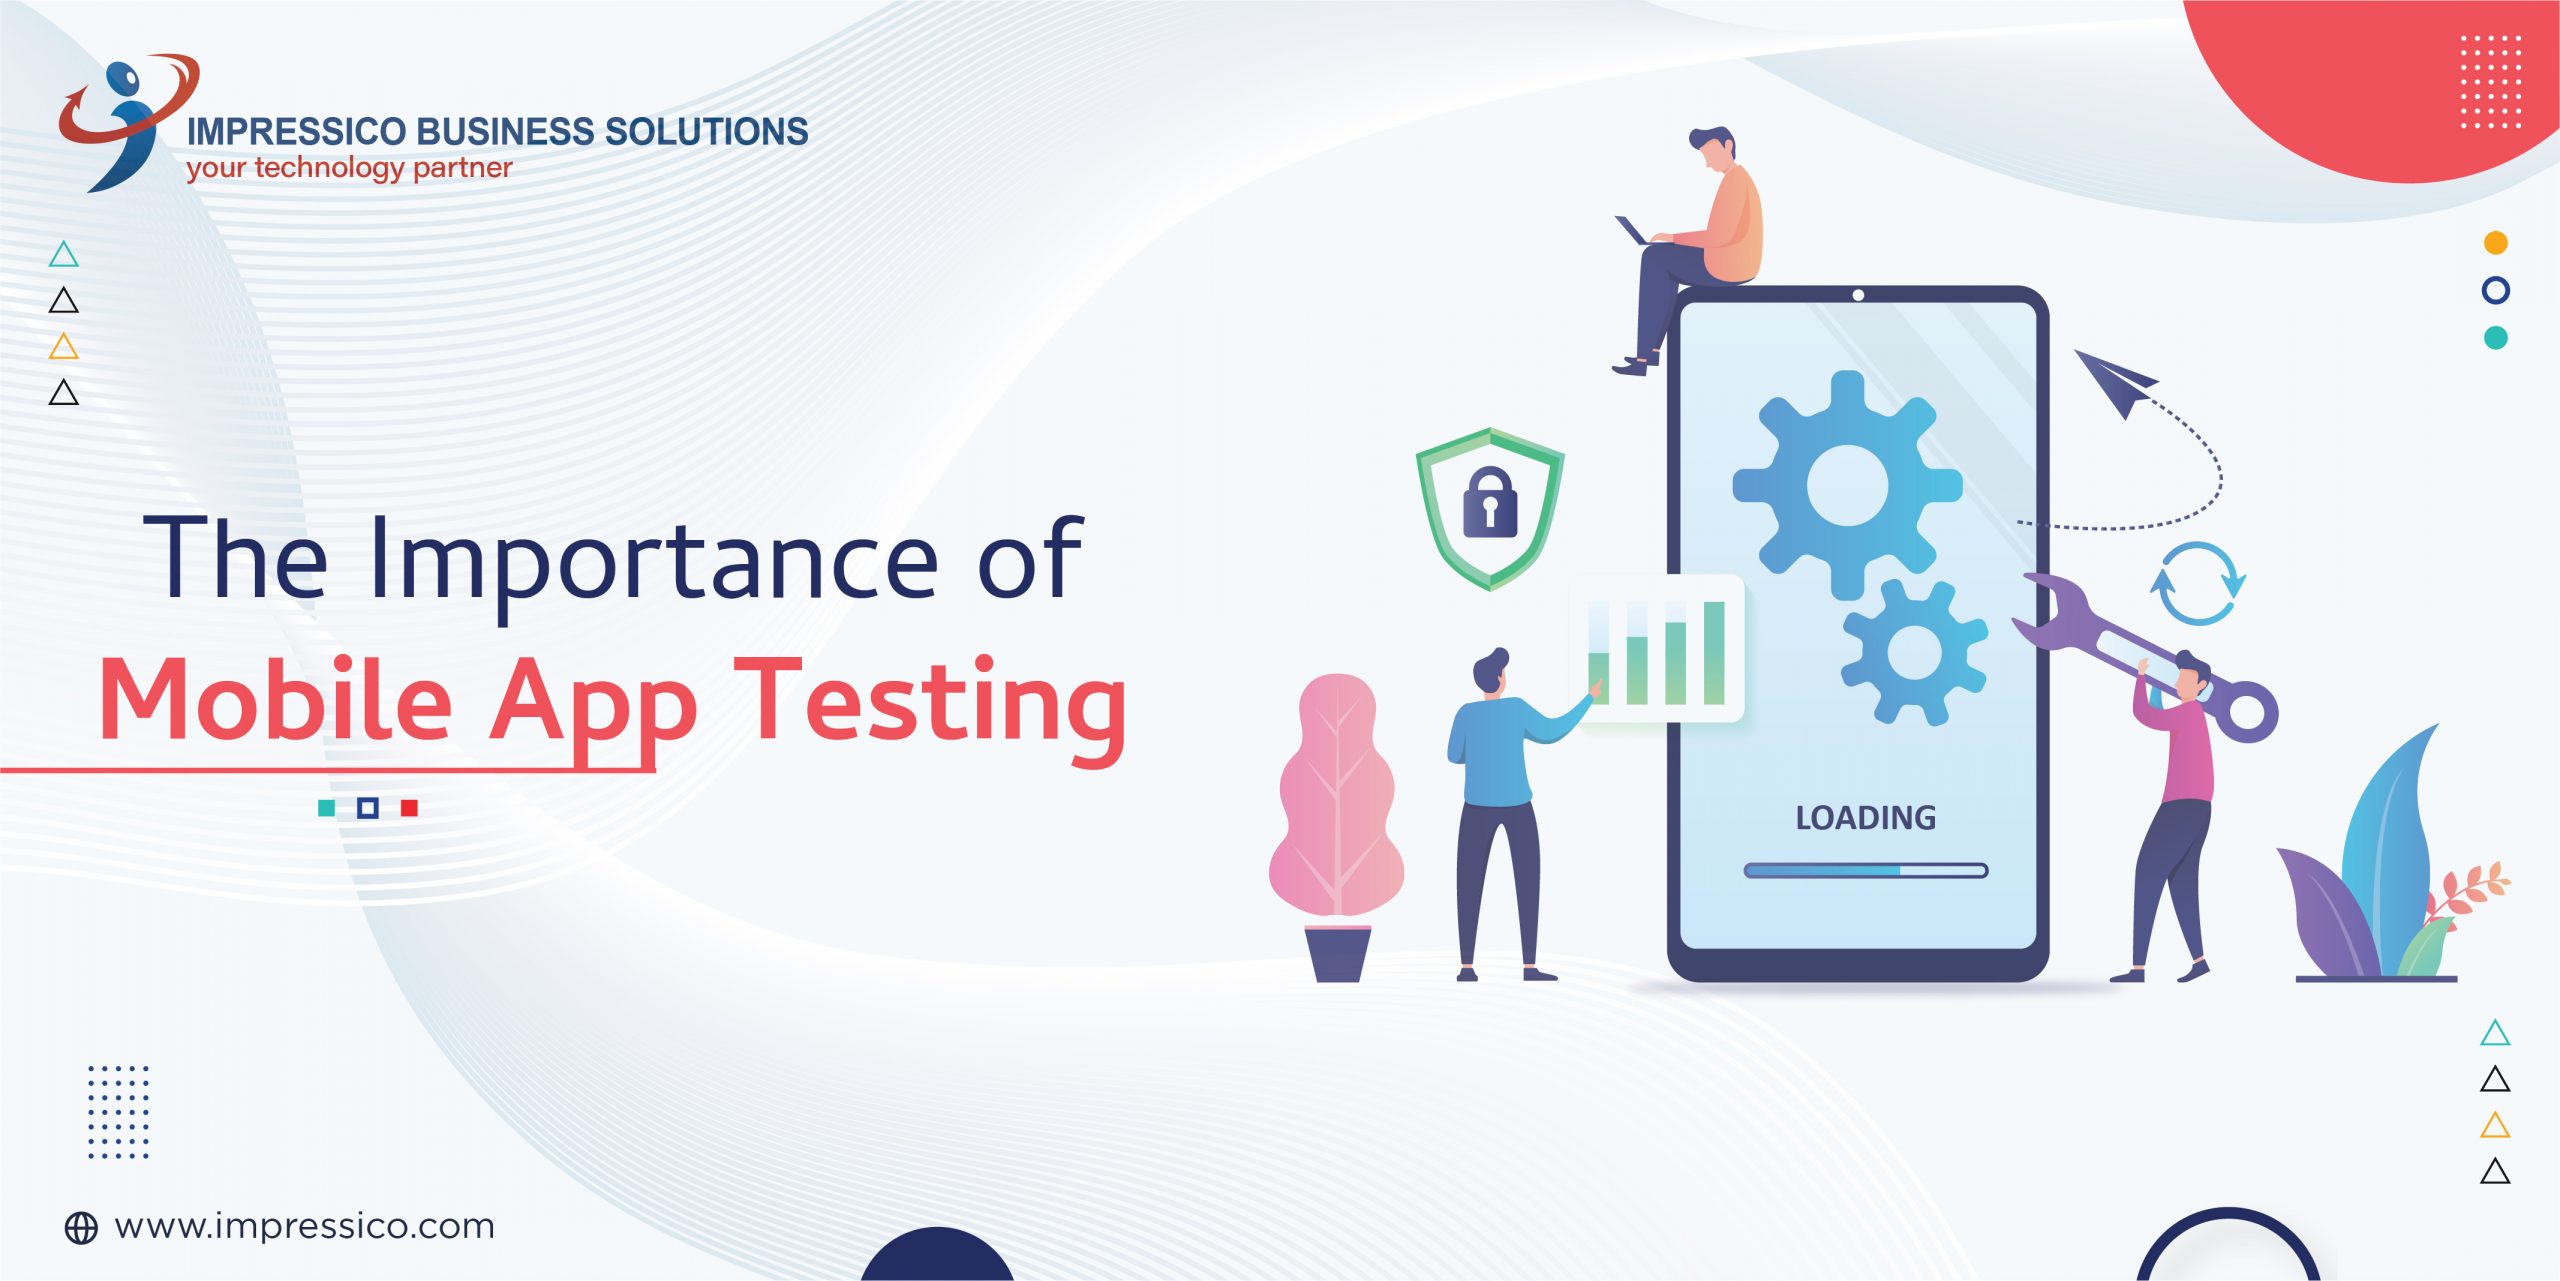 Mobile app testing services